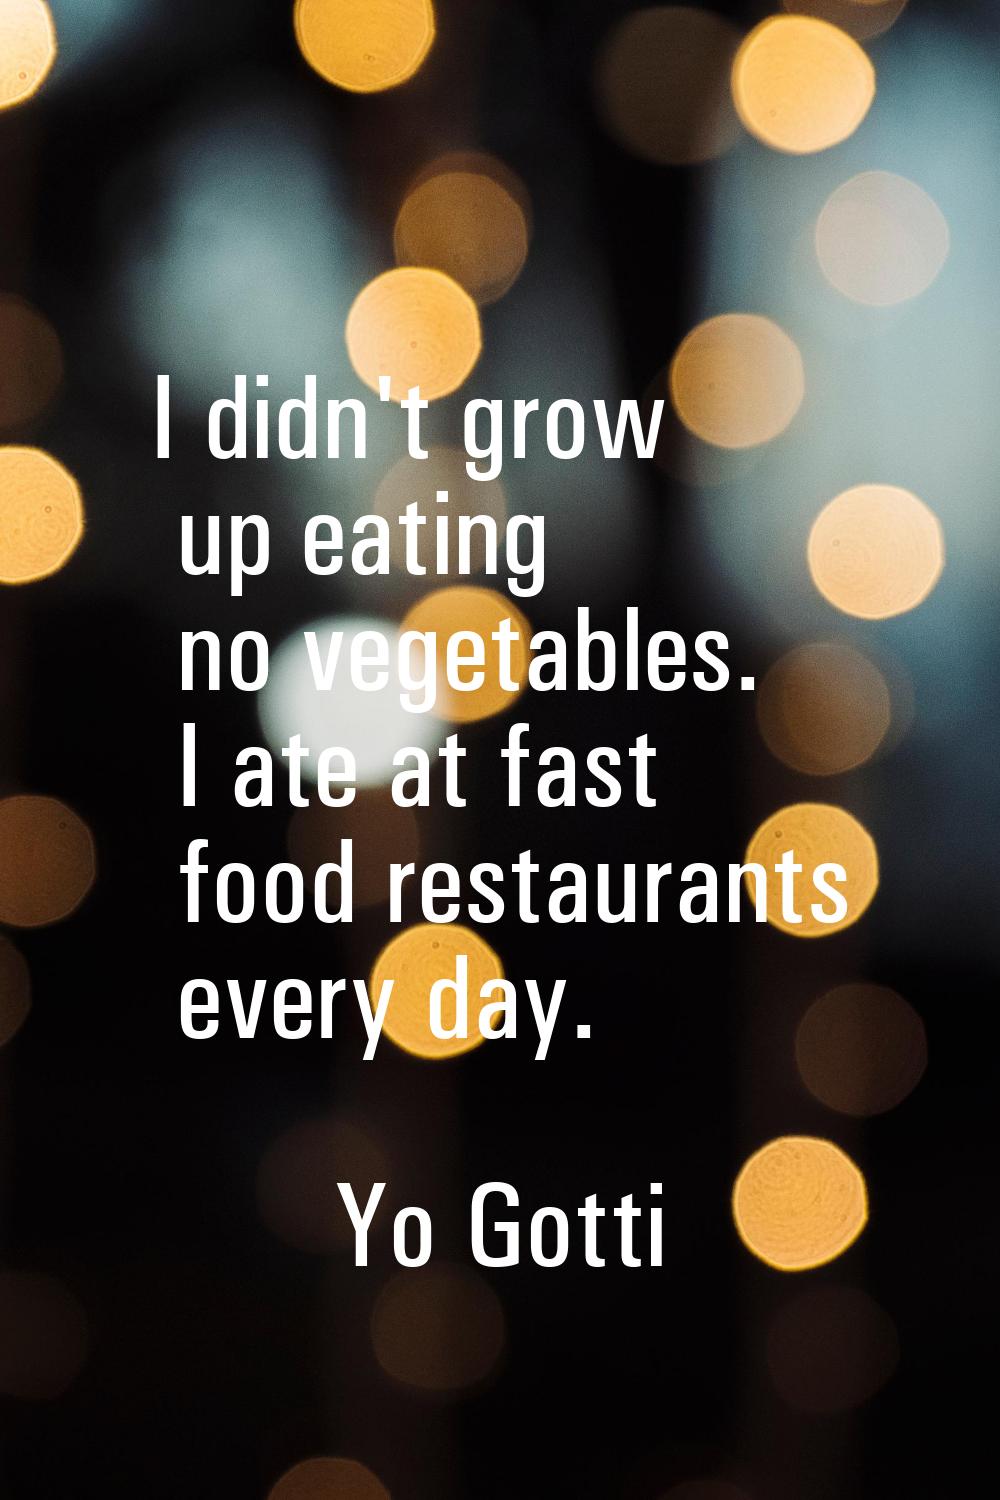 I didn't grow up eating no vegetables. I ate at fast food restaurants every day.